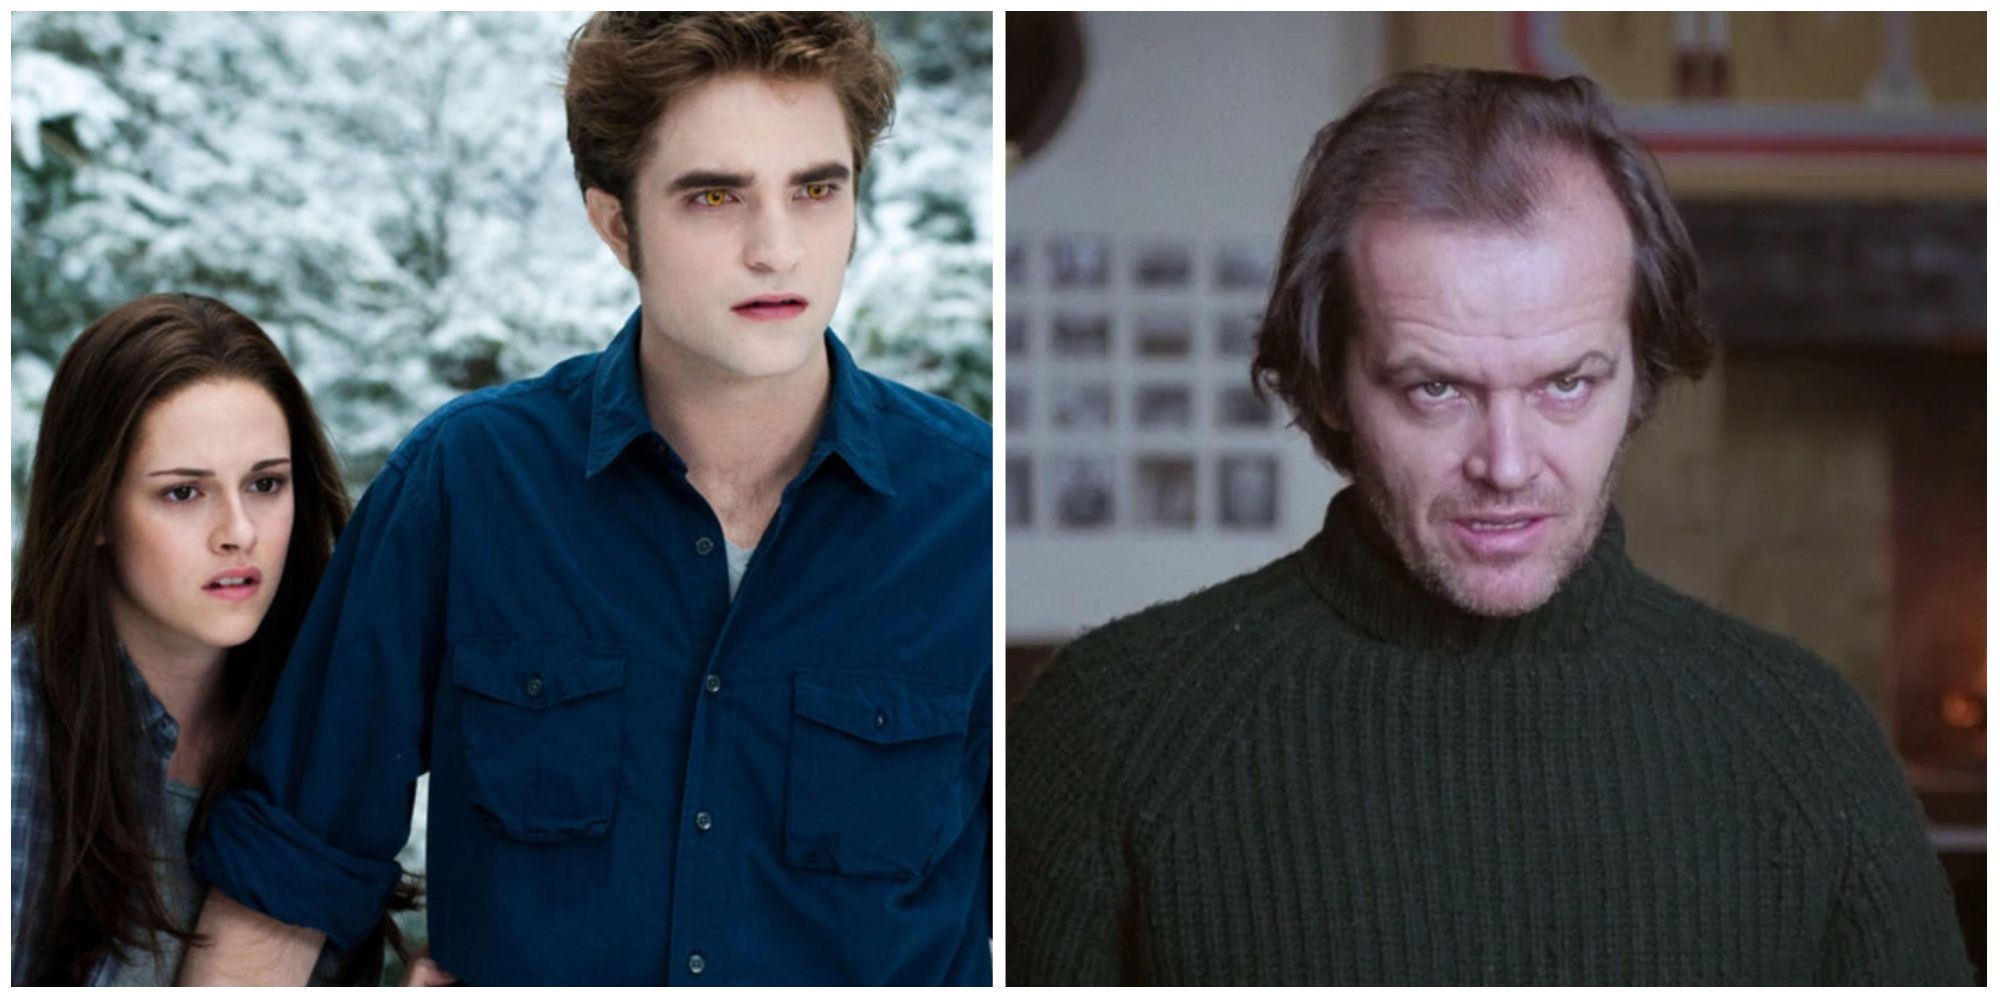 Edward Cullen and Bella Swan in Twilight (left) and Jack Torrance in The Shining (right)